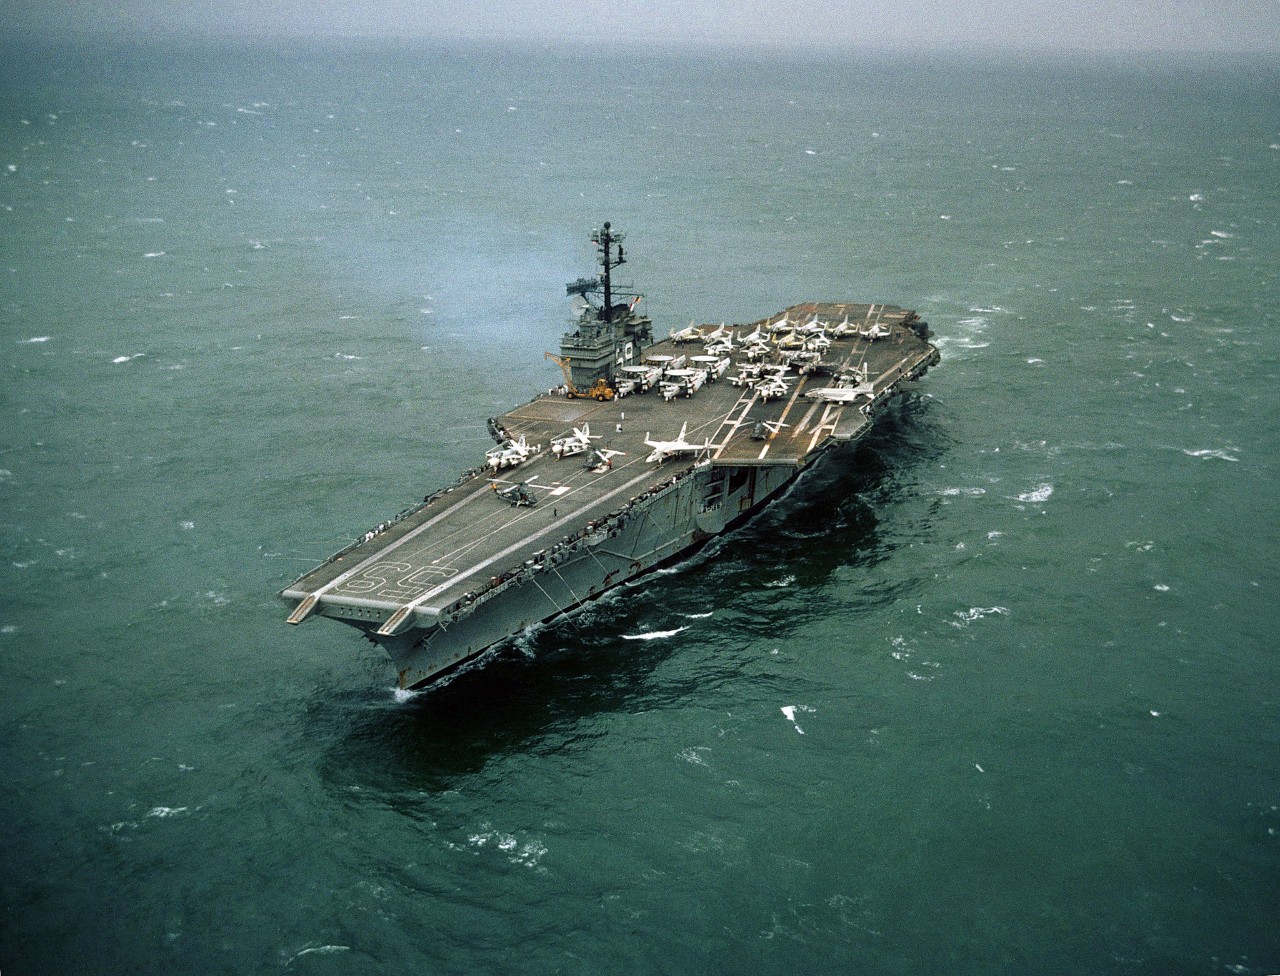 330-CFD-DN-SC-04-09140:  An aerial port bow view of USS Forrestal (CVA-59) underway.   Photographed August 12, 1967 by PHC H.L. Wise, USN.  Official U.S. Navy Photograph, now in the collections of the National Archives.  